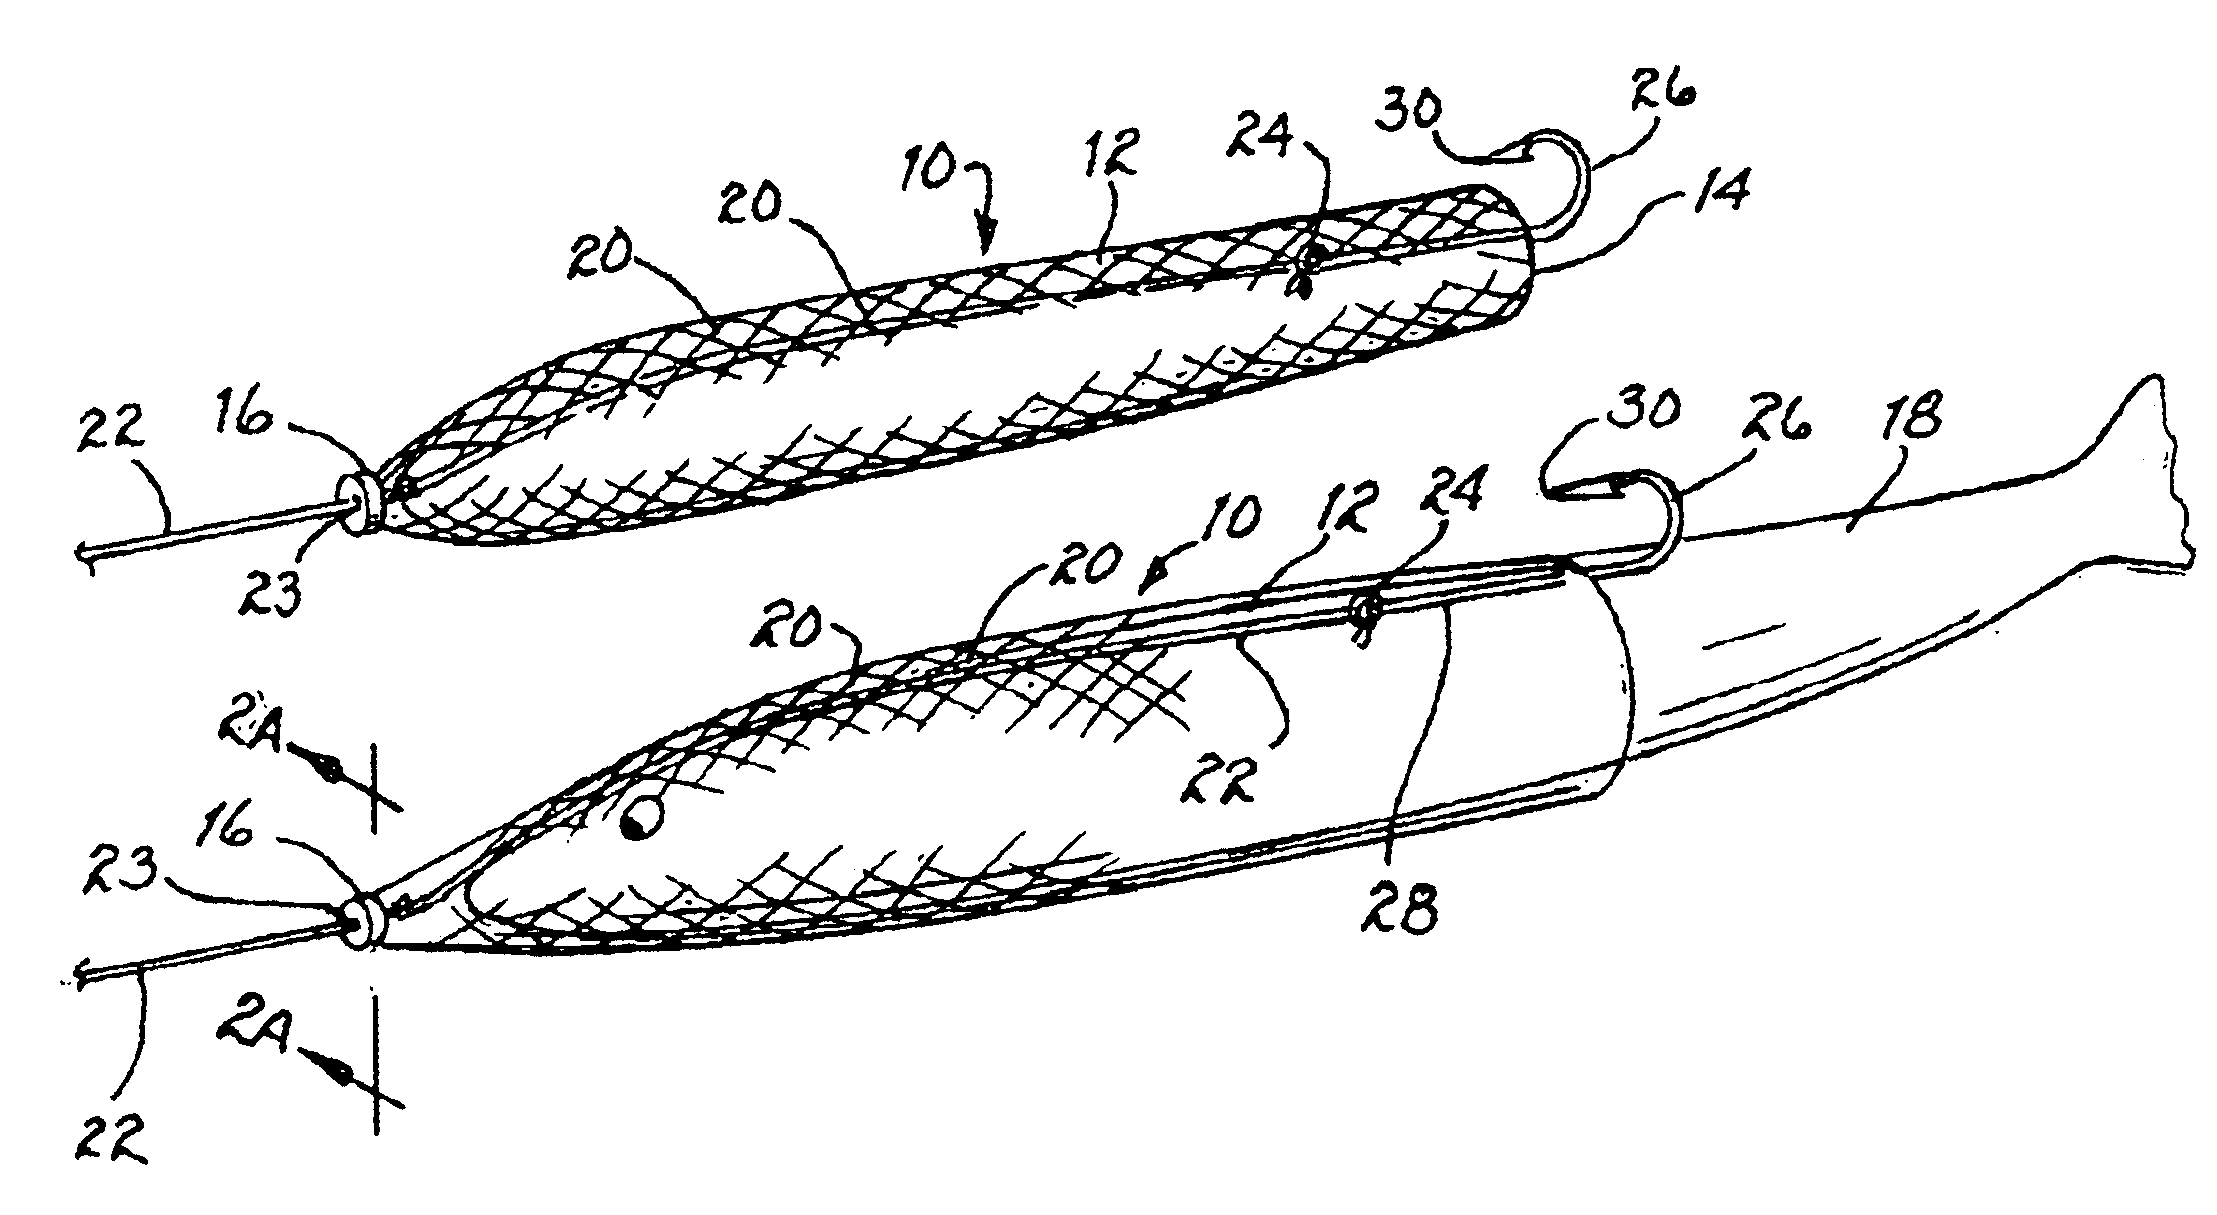 Expandable bait sleeve and method therefor